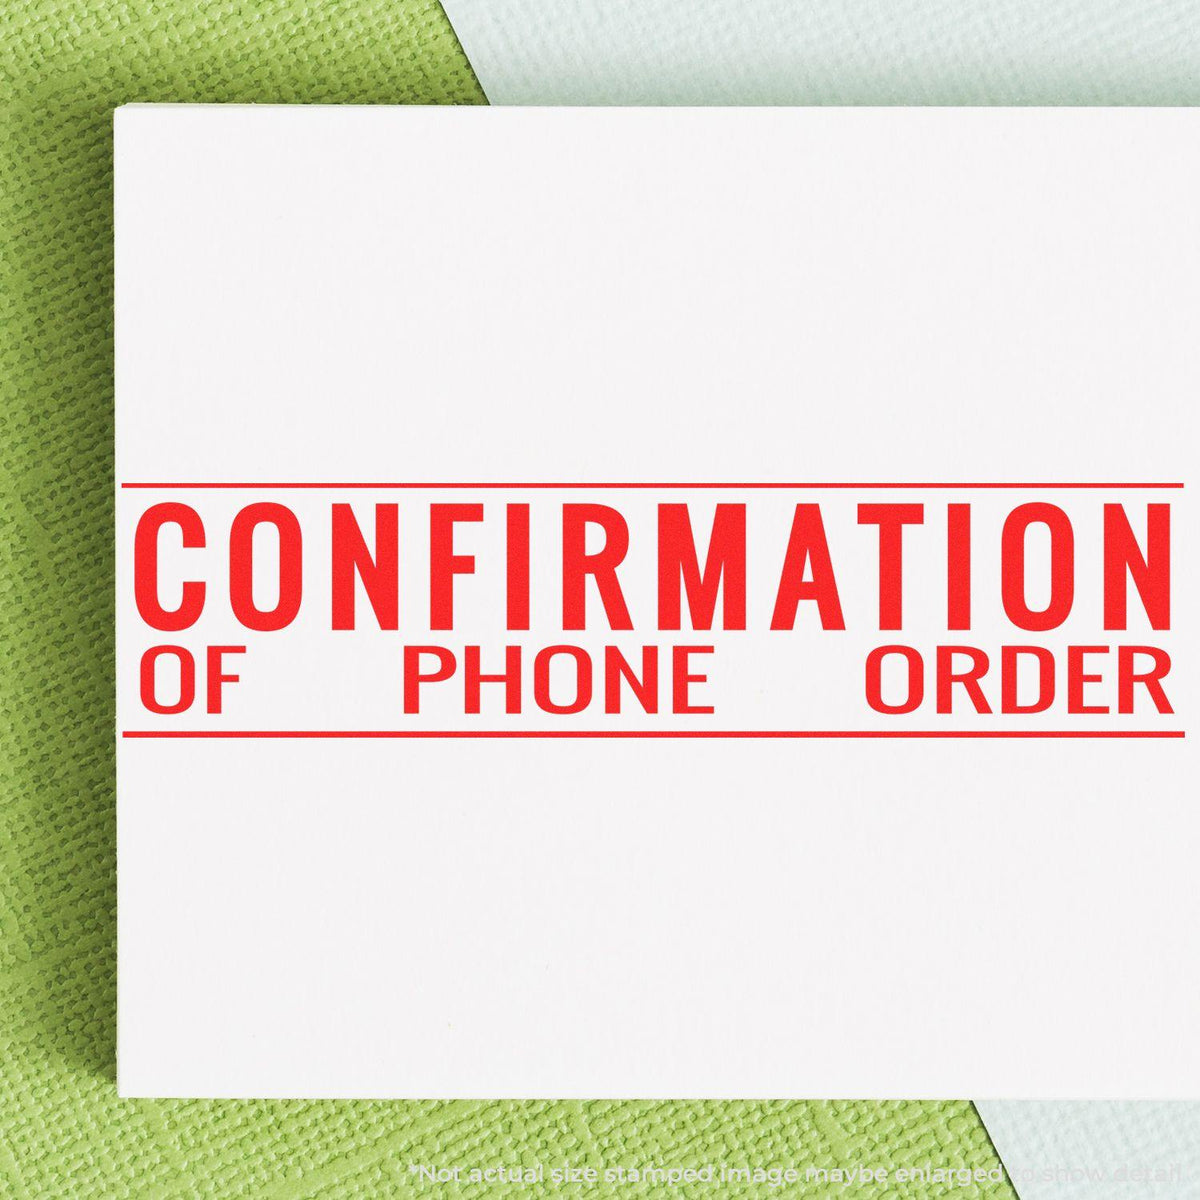 In Use Large Self-Inking Confirmation of Phone Order Stamp Image